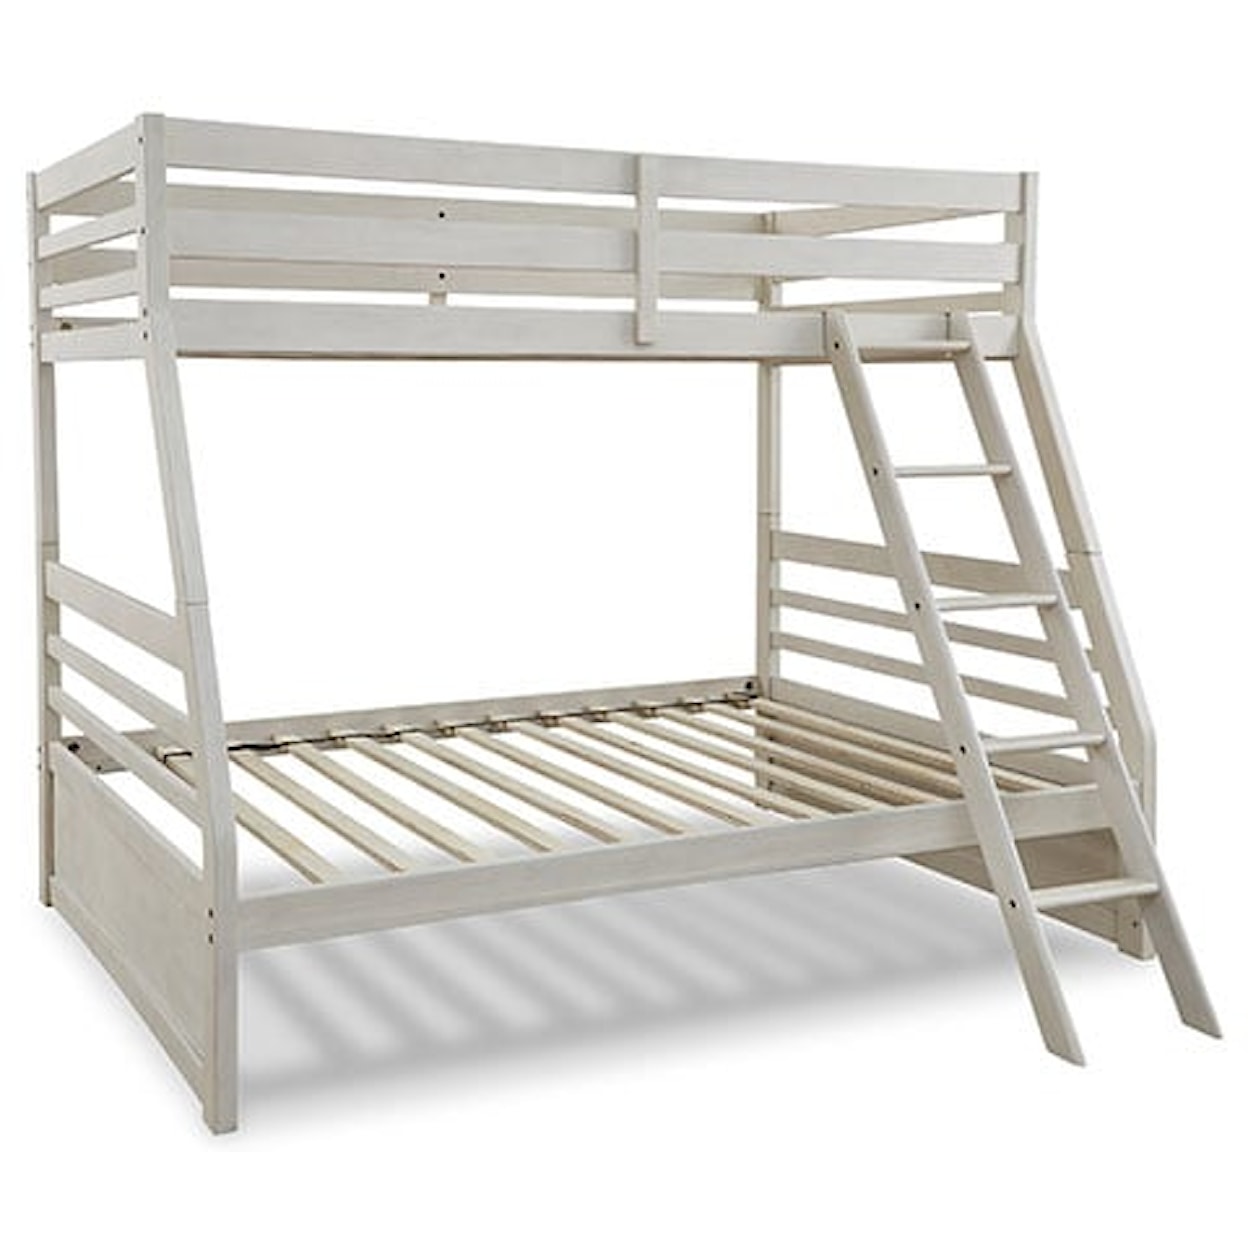 Benchcraft Robbinsdale Twin/Full Bunk Bed